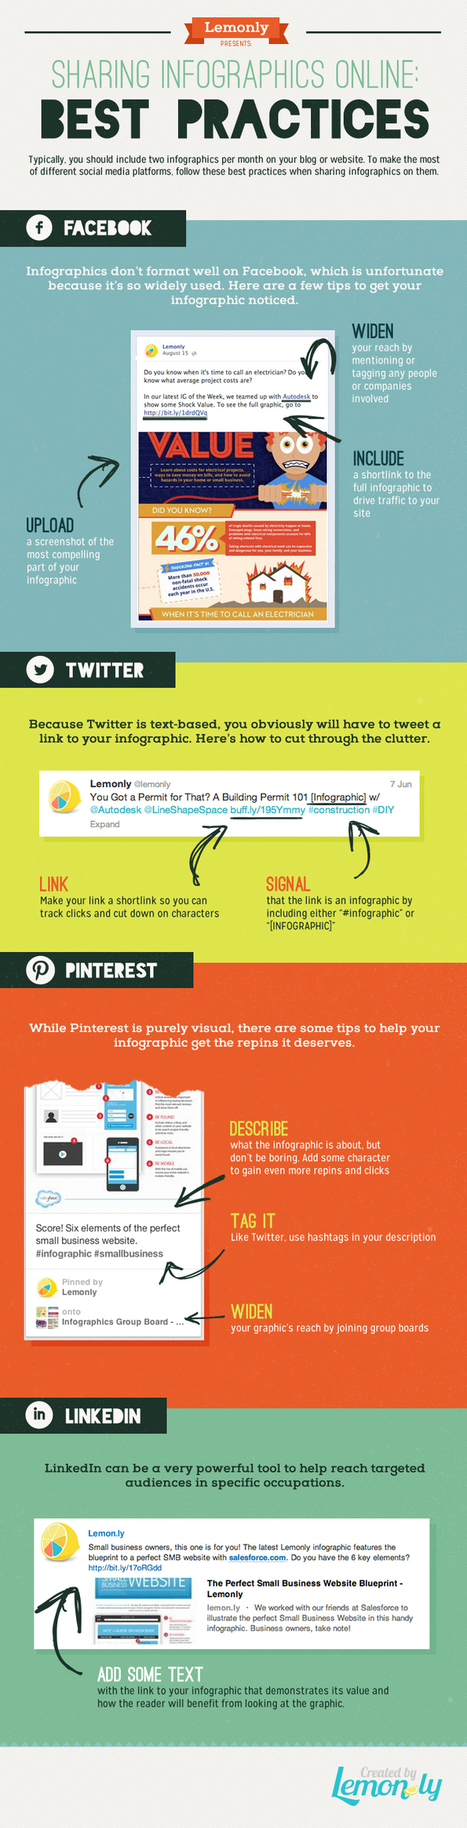 Social Media Best Practices for Infographics | digital marketing strategy | Scoop.it